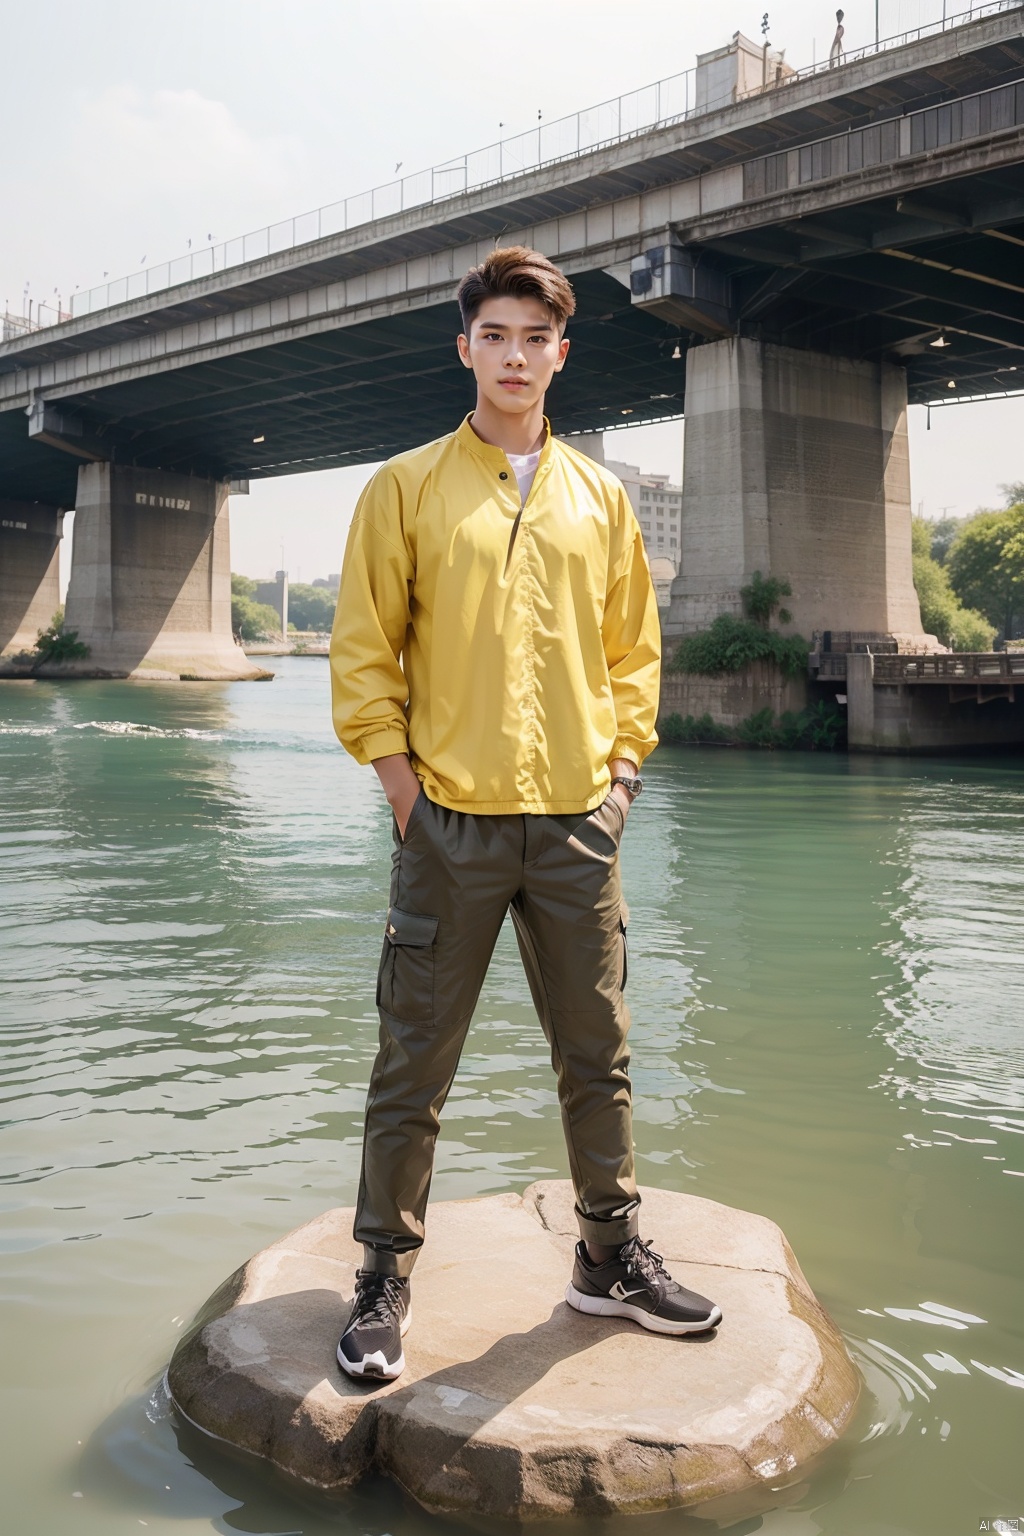  (1boy:1.5),1boy, solo,full body,front
,brown hair,handsome,white skin,yellow theme,yellow clothes,short hair,whole body,solo,Stand on the river,Facial detail portrayal,Perfect facial features,standing,watch audience,